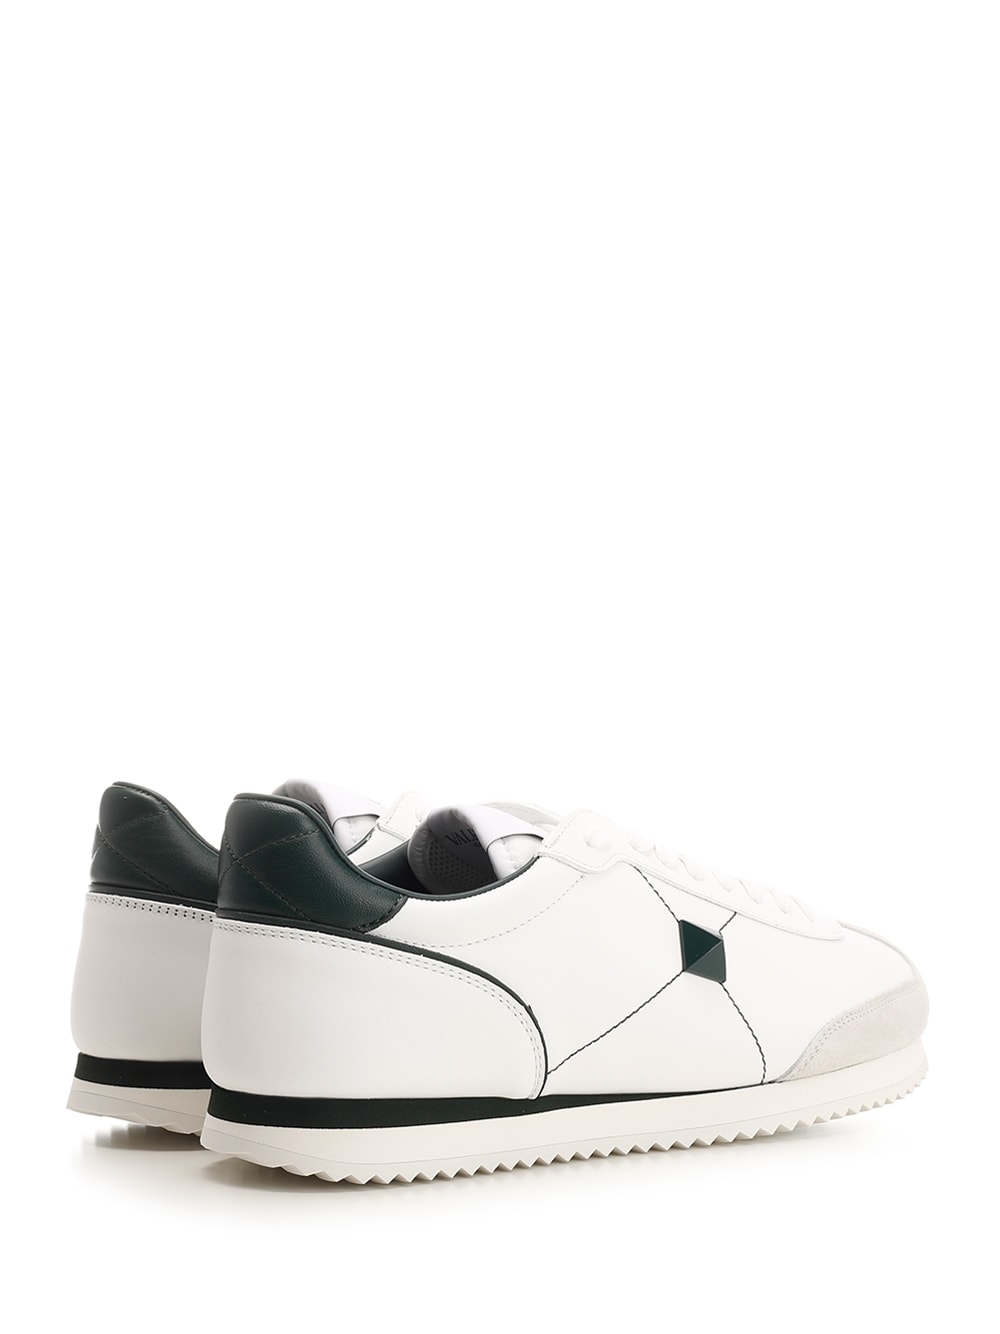 Shop Valentino Stud Sneakers In Green